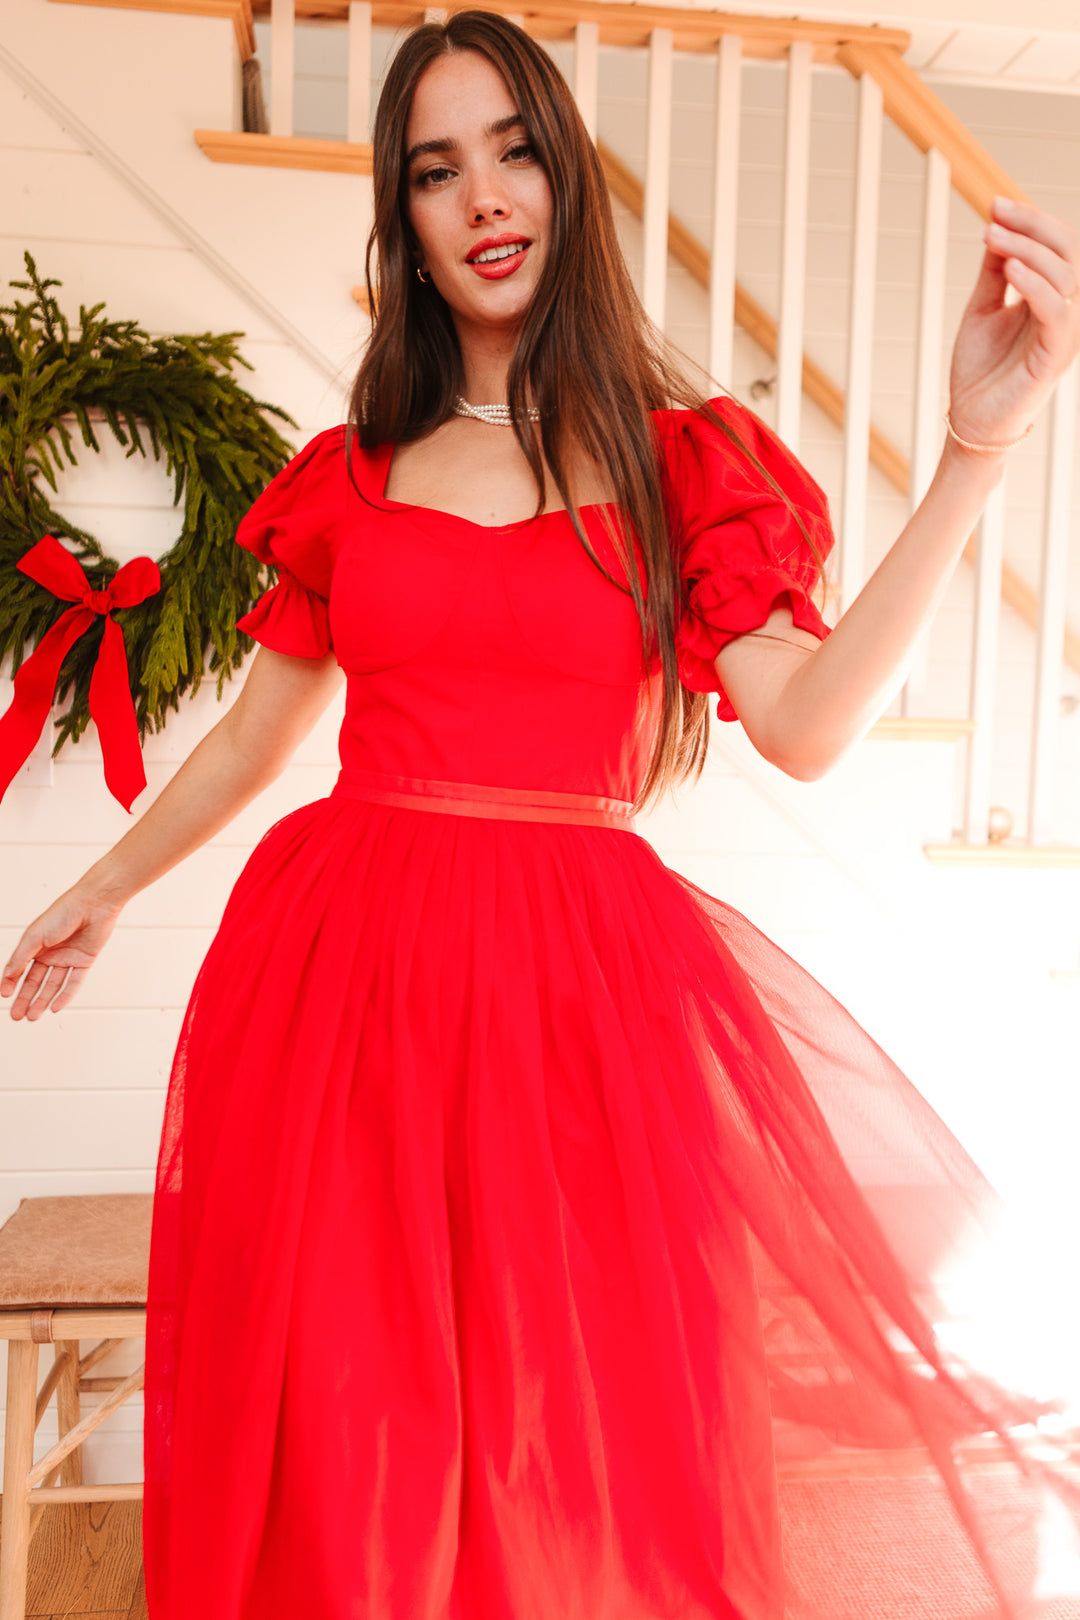 Ivy City Co Ballerina Dress in Red - Final Sale Small